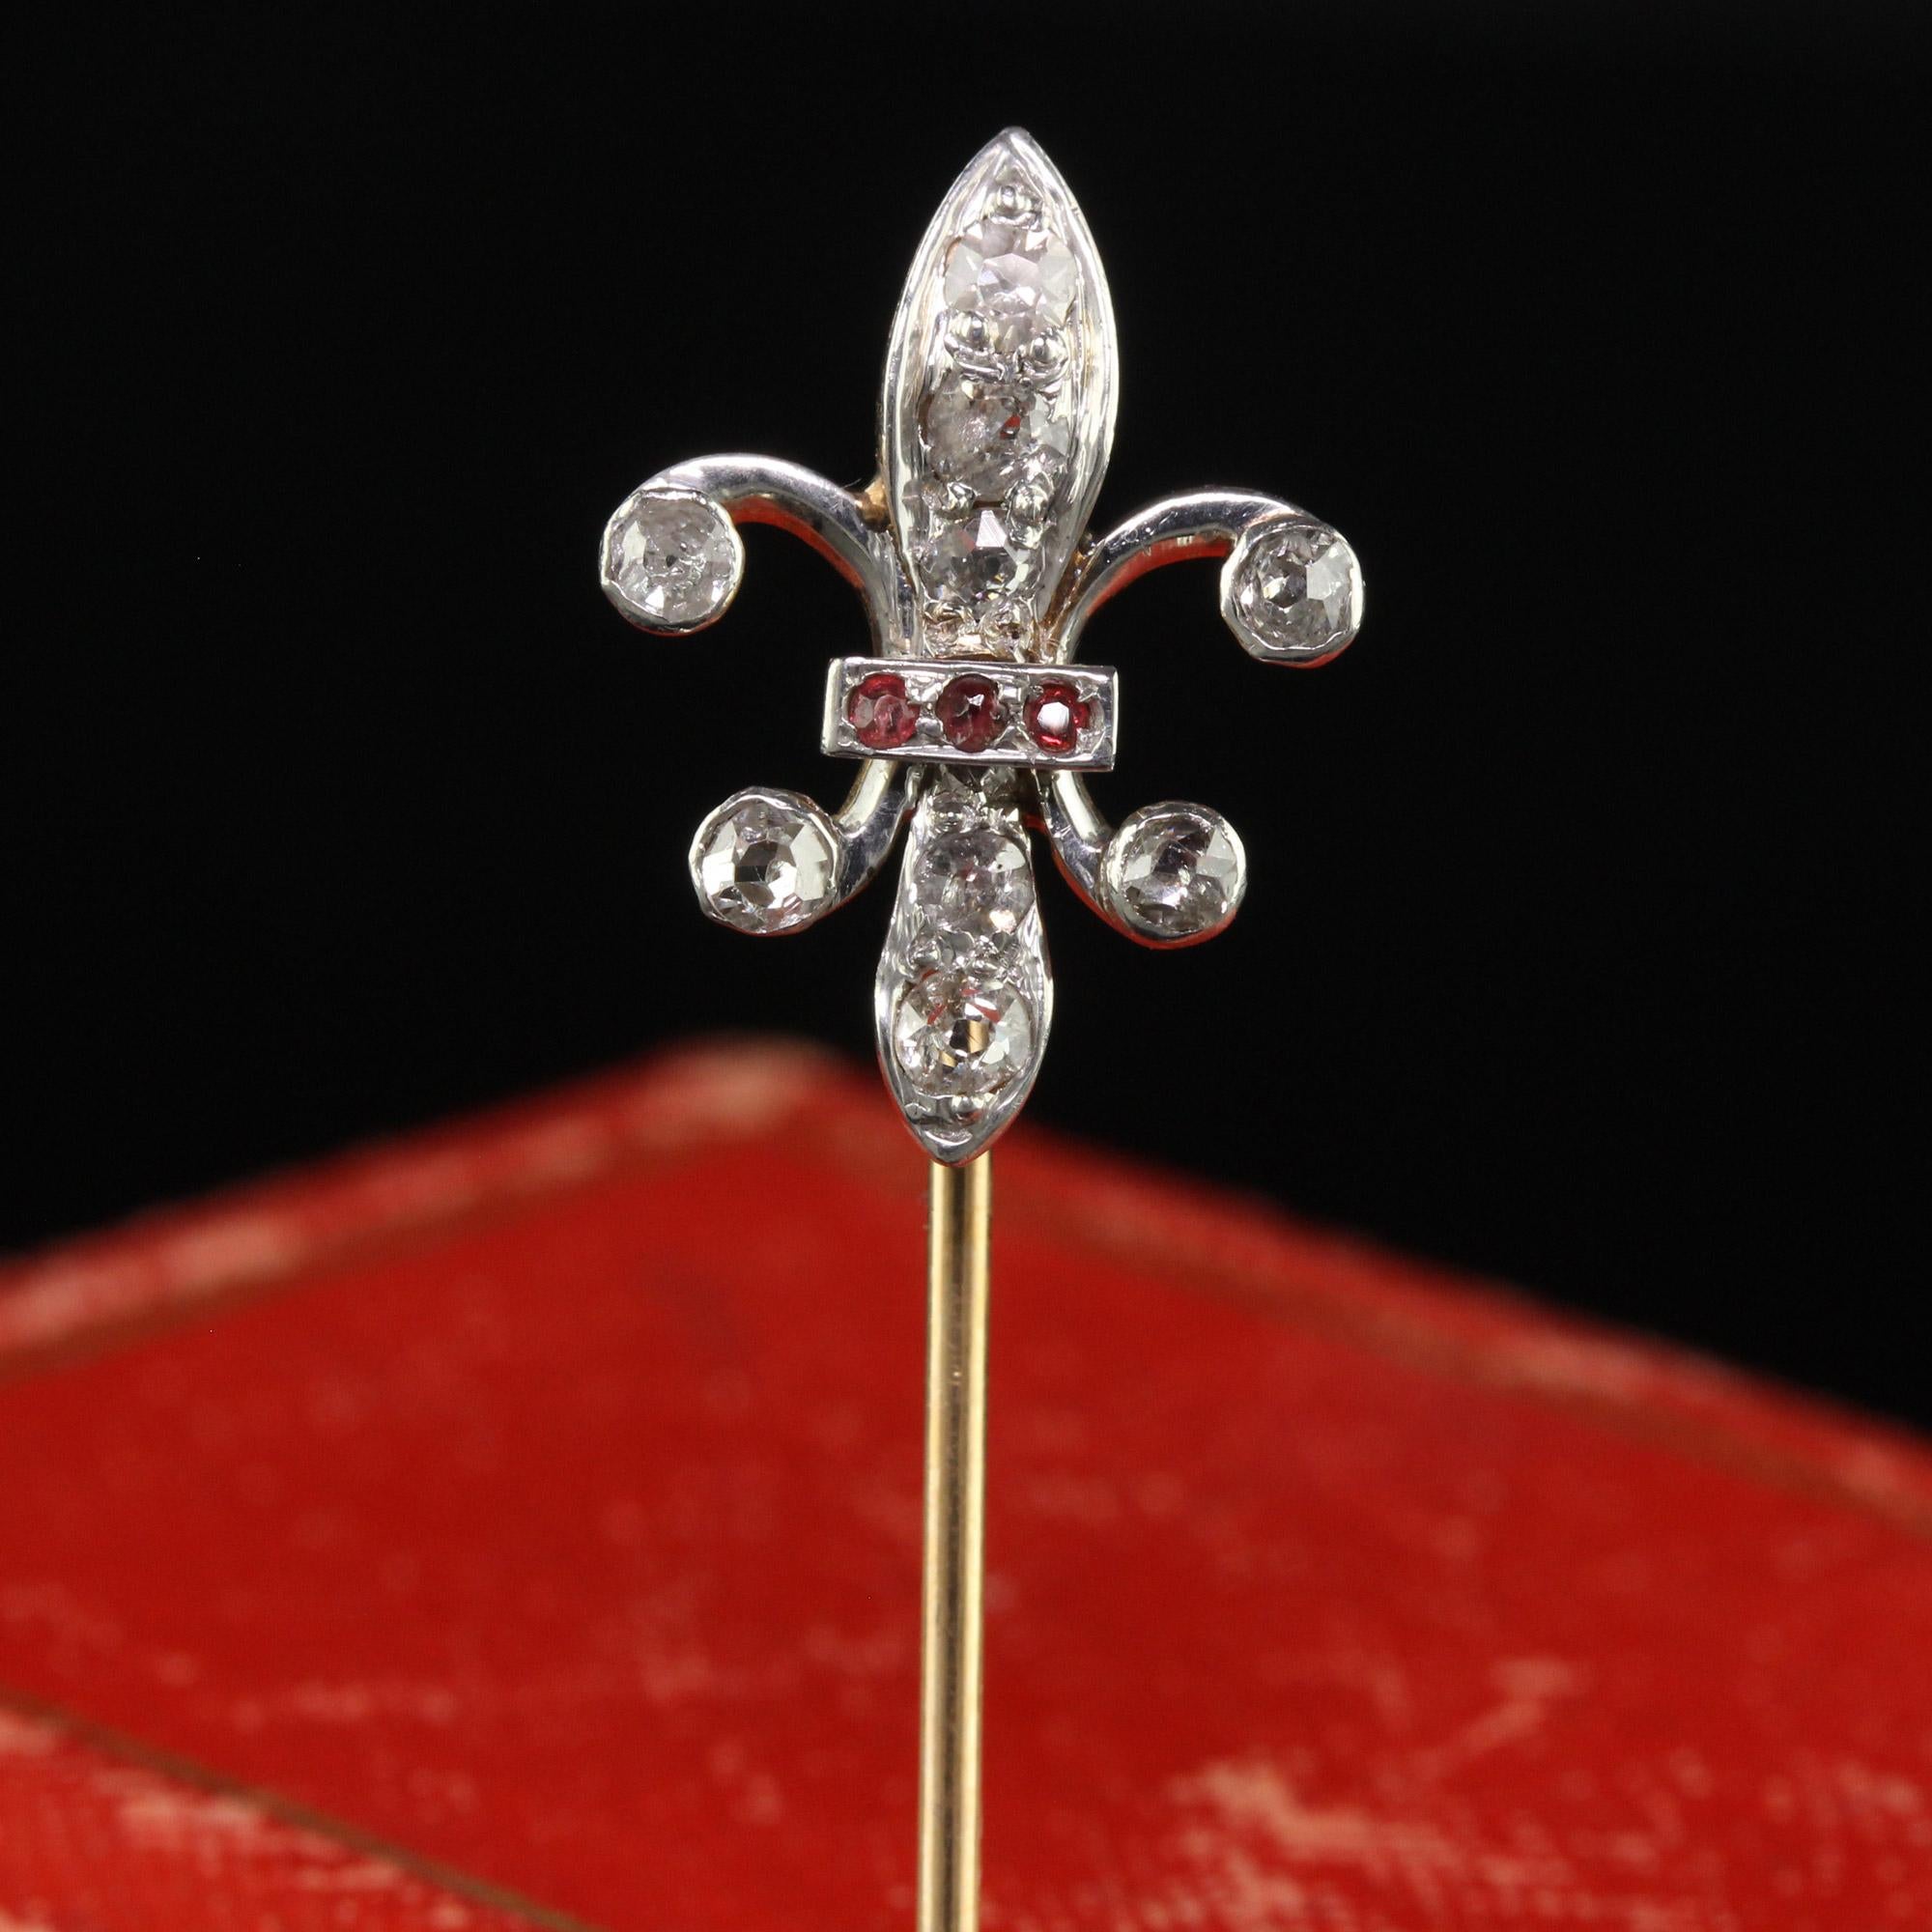 Beautiful Antique Art Deco 18K Gold and Platinum Fleur De Lis Diamond Stick Pin. This beautiful Fleur De Lis stick pin is crafted in 18k yellow gold and platinum. The top of the pin has old cut diamonds with a row of rubies in the middle. The pin is